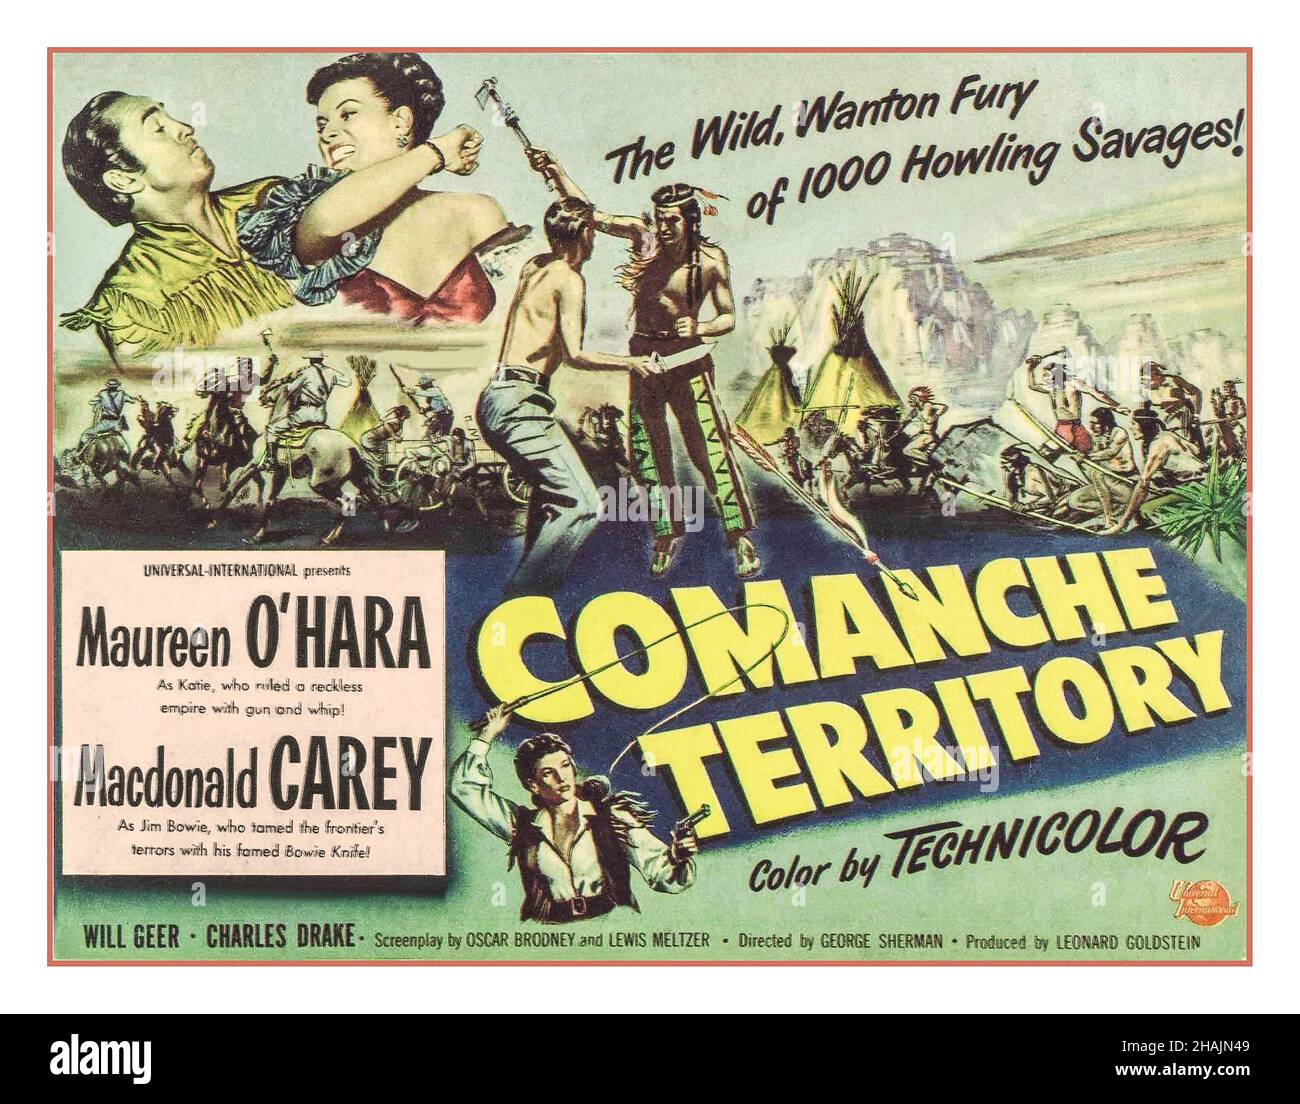 COMMANCHE TERRITORY Vintage Movie Film Poster 'Comanche Territory' USA aggression towards North American Indians  a 1950 American Western film directed by George Sherman and starring Maureen O'Hara and Macdonald Carey. Jim Bowie is sent into Comanche country on a mission to allow the government to mine silver on the Indian's turf. Starring Maureen O'Hara as Katie Howard. Macdonald Carey as James Bowie Will Geer as Dan'l Seeger Charles Drake as Stacey Howard Pedro de Cordoba as Quisima Ian MacDonald as Walsh Stock Photo